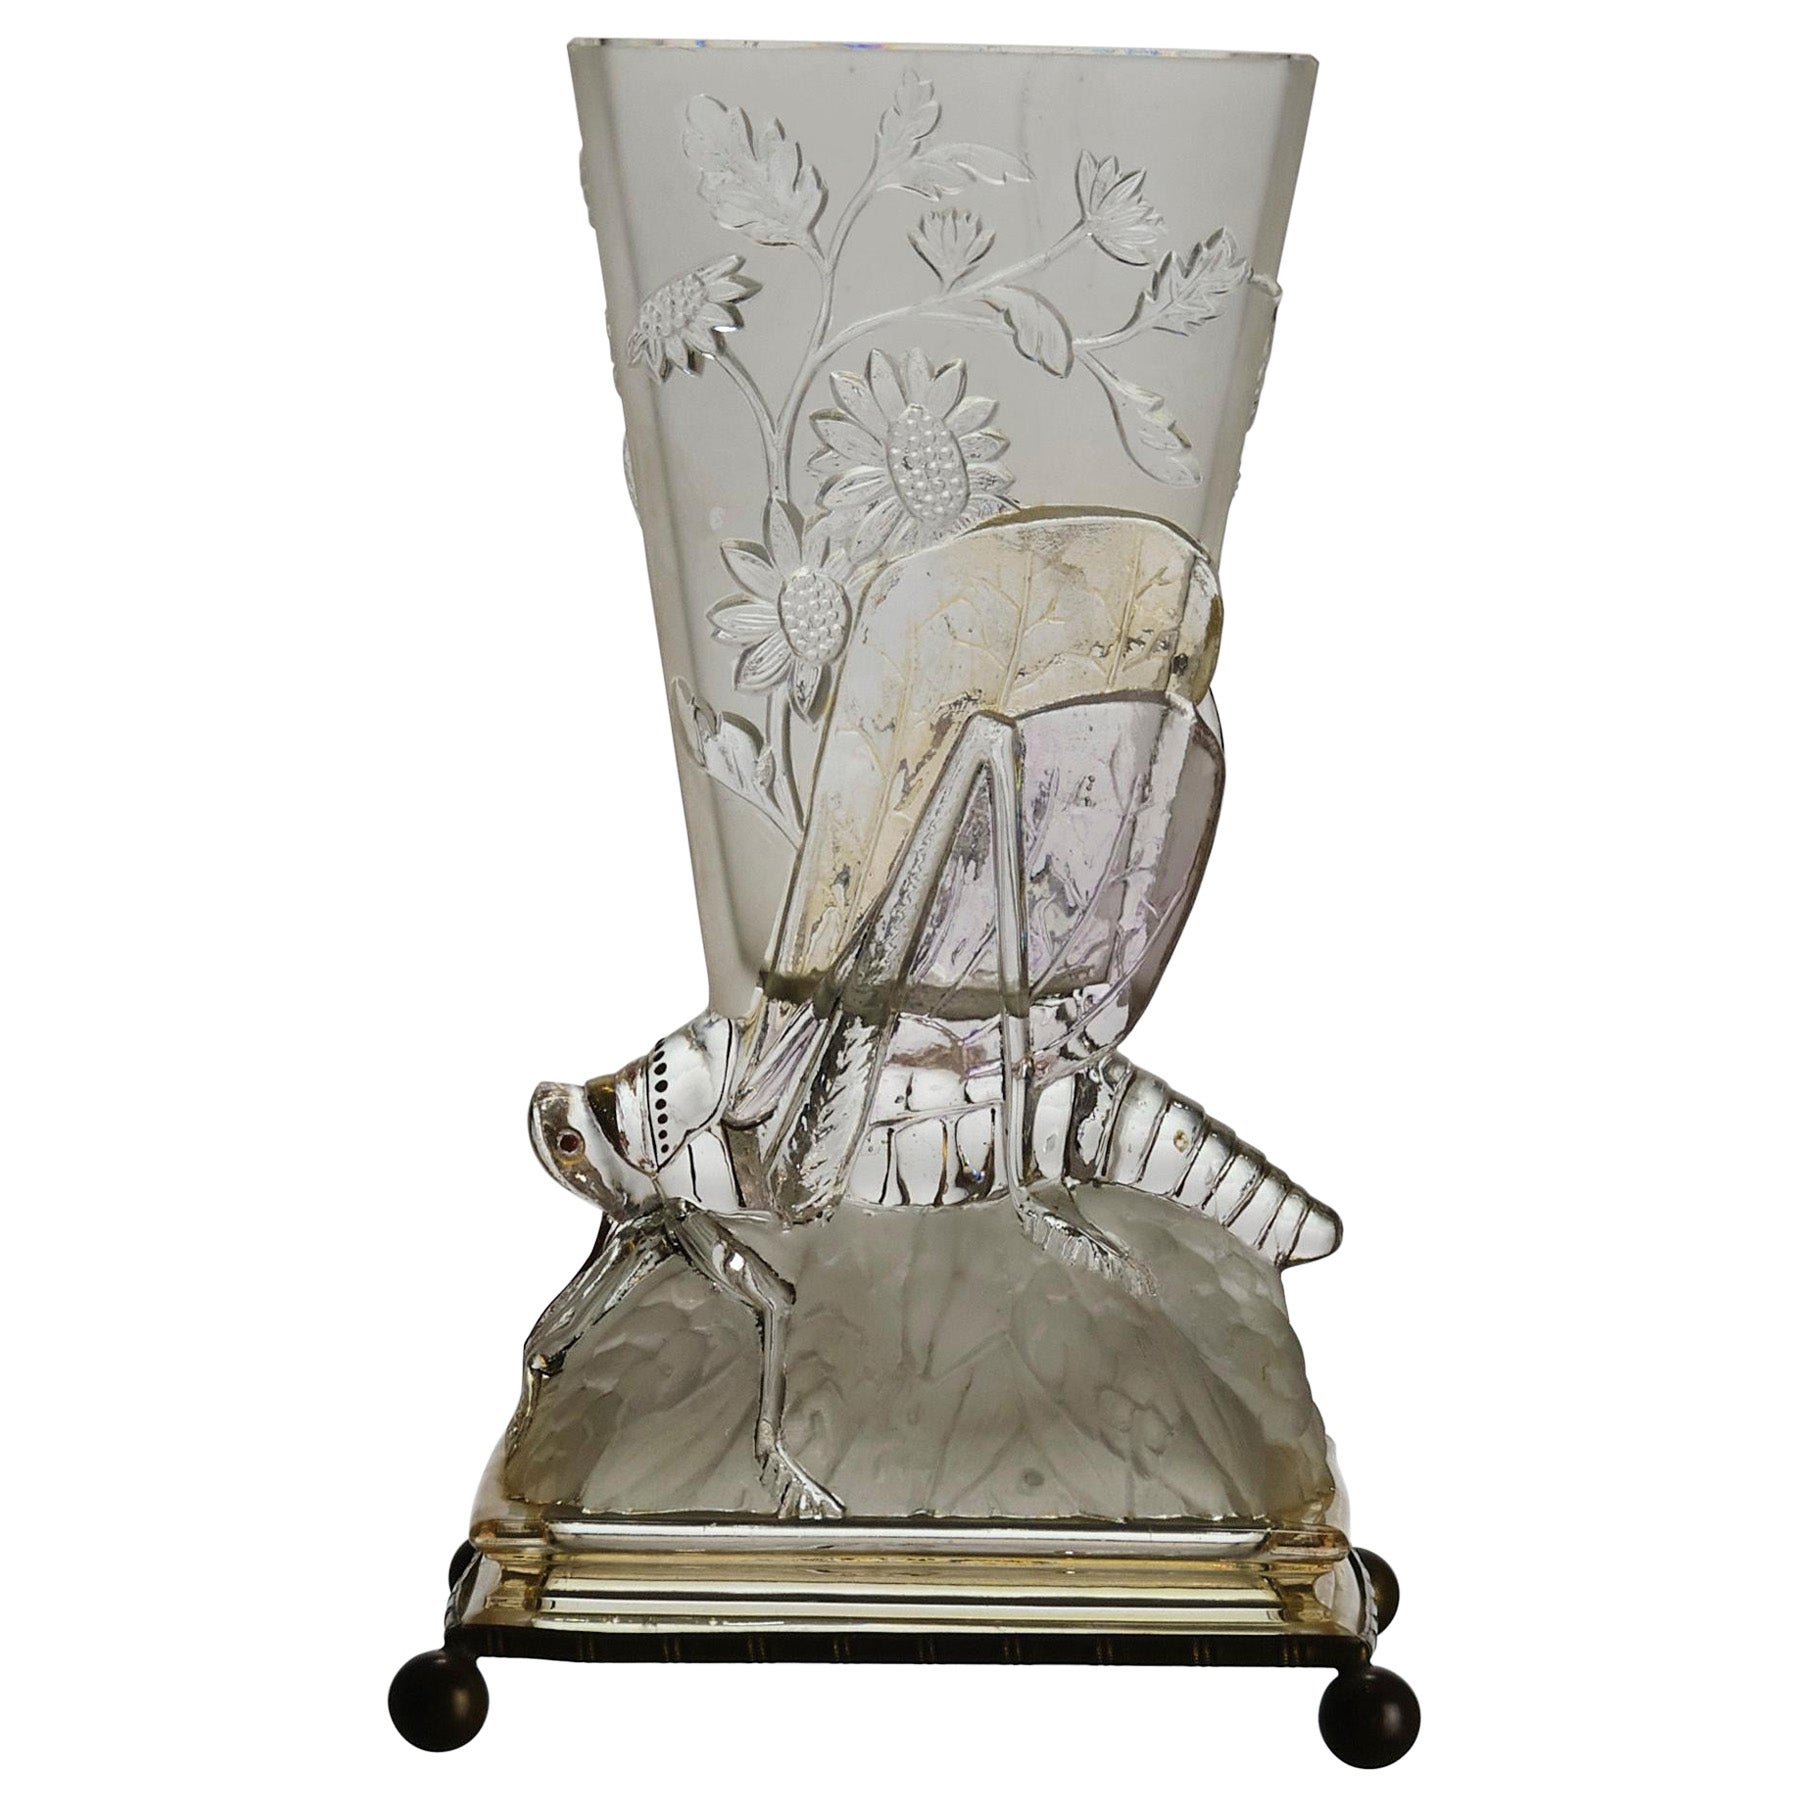 Early 20th Century Art Deco Frosted Glass "Grasshopper Vase" by Baccarat Glass For Sale